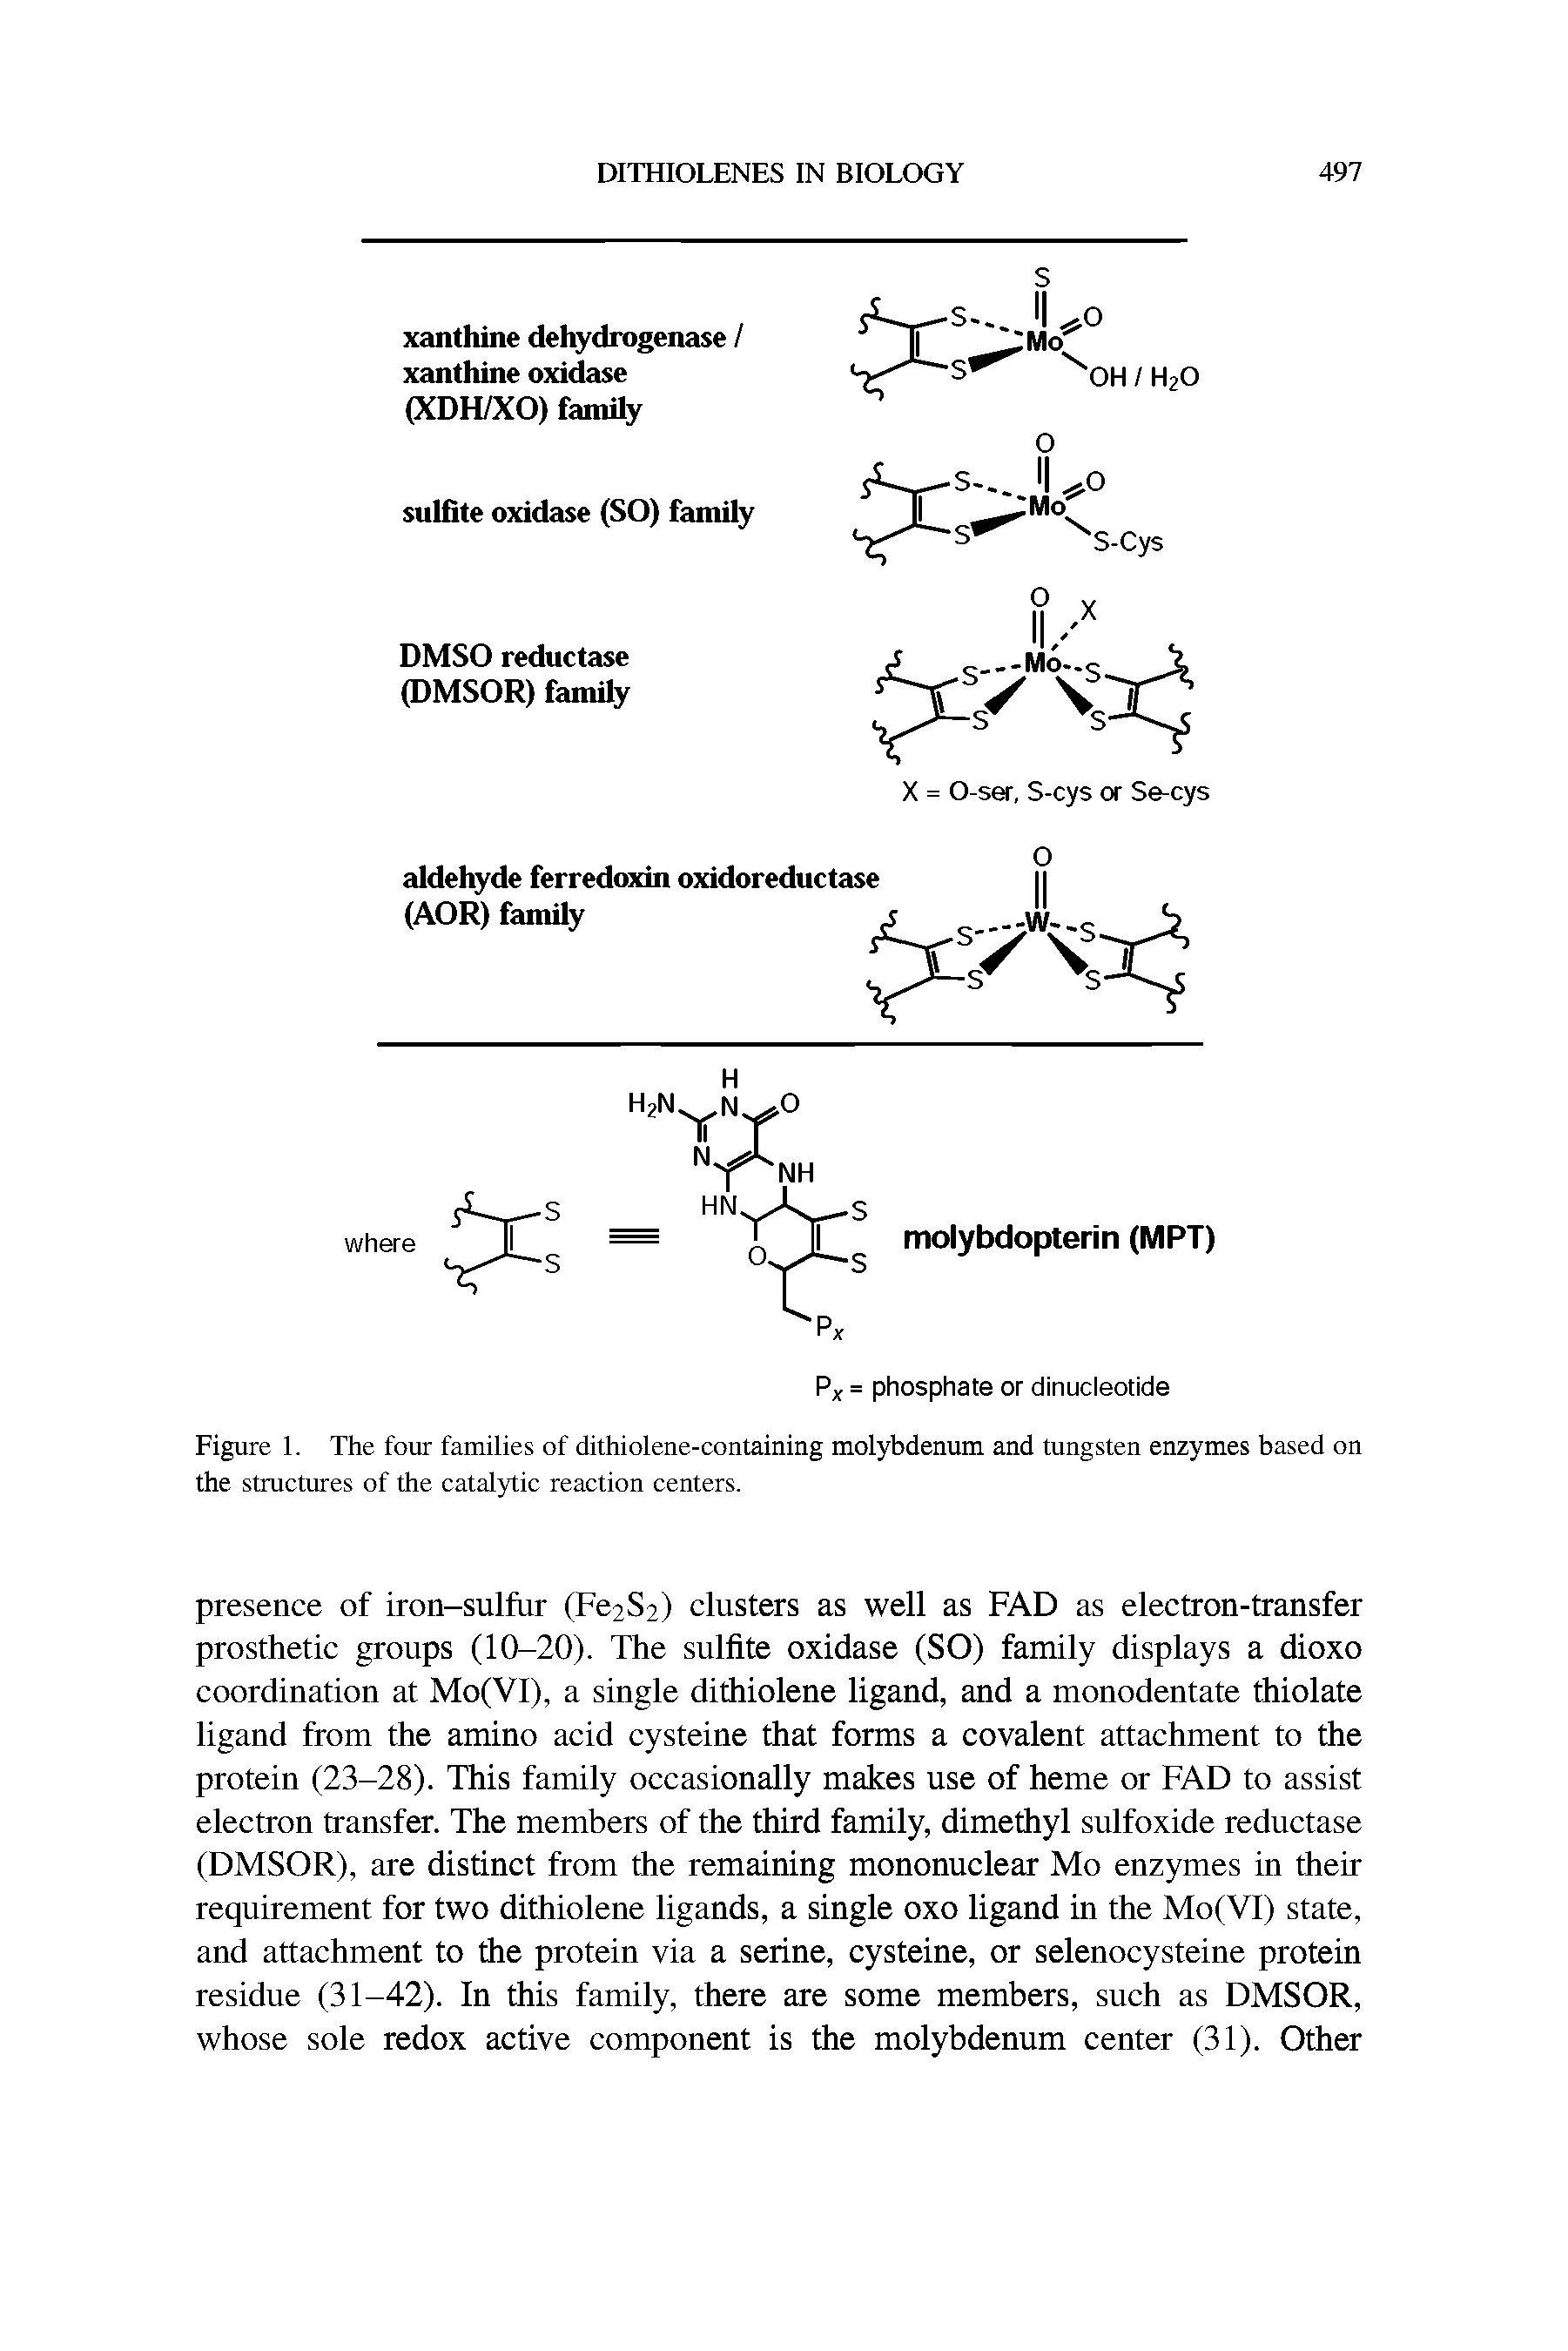 Figure 1. The four families of dithiolene-containing molybdenum and tungsten enzymes based on the structures of the catalytic reaction centers.